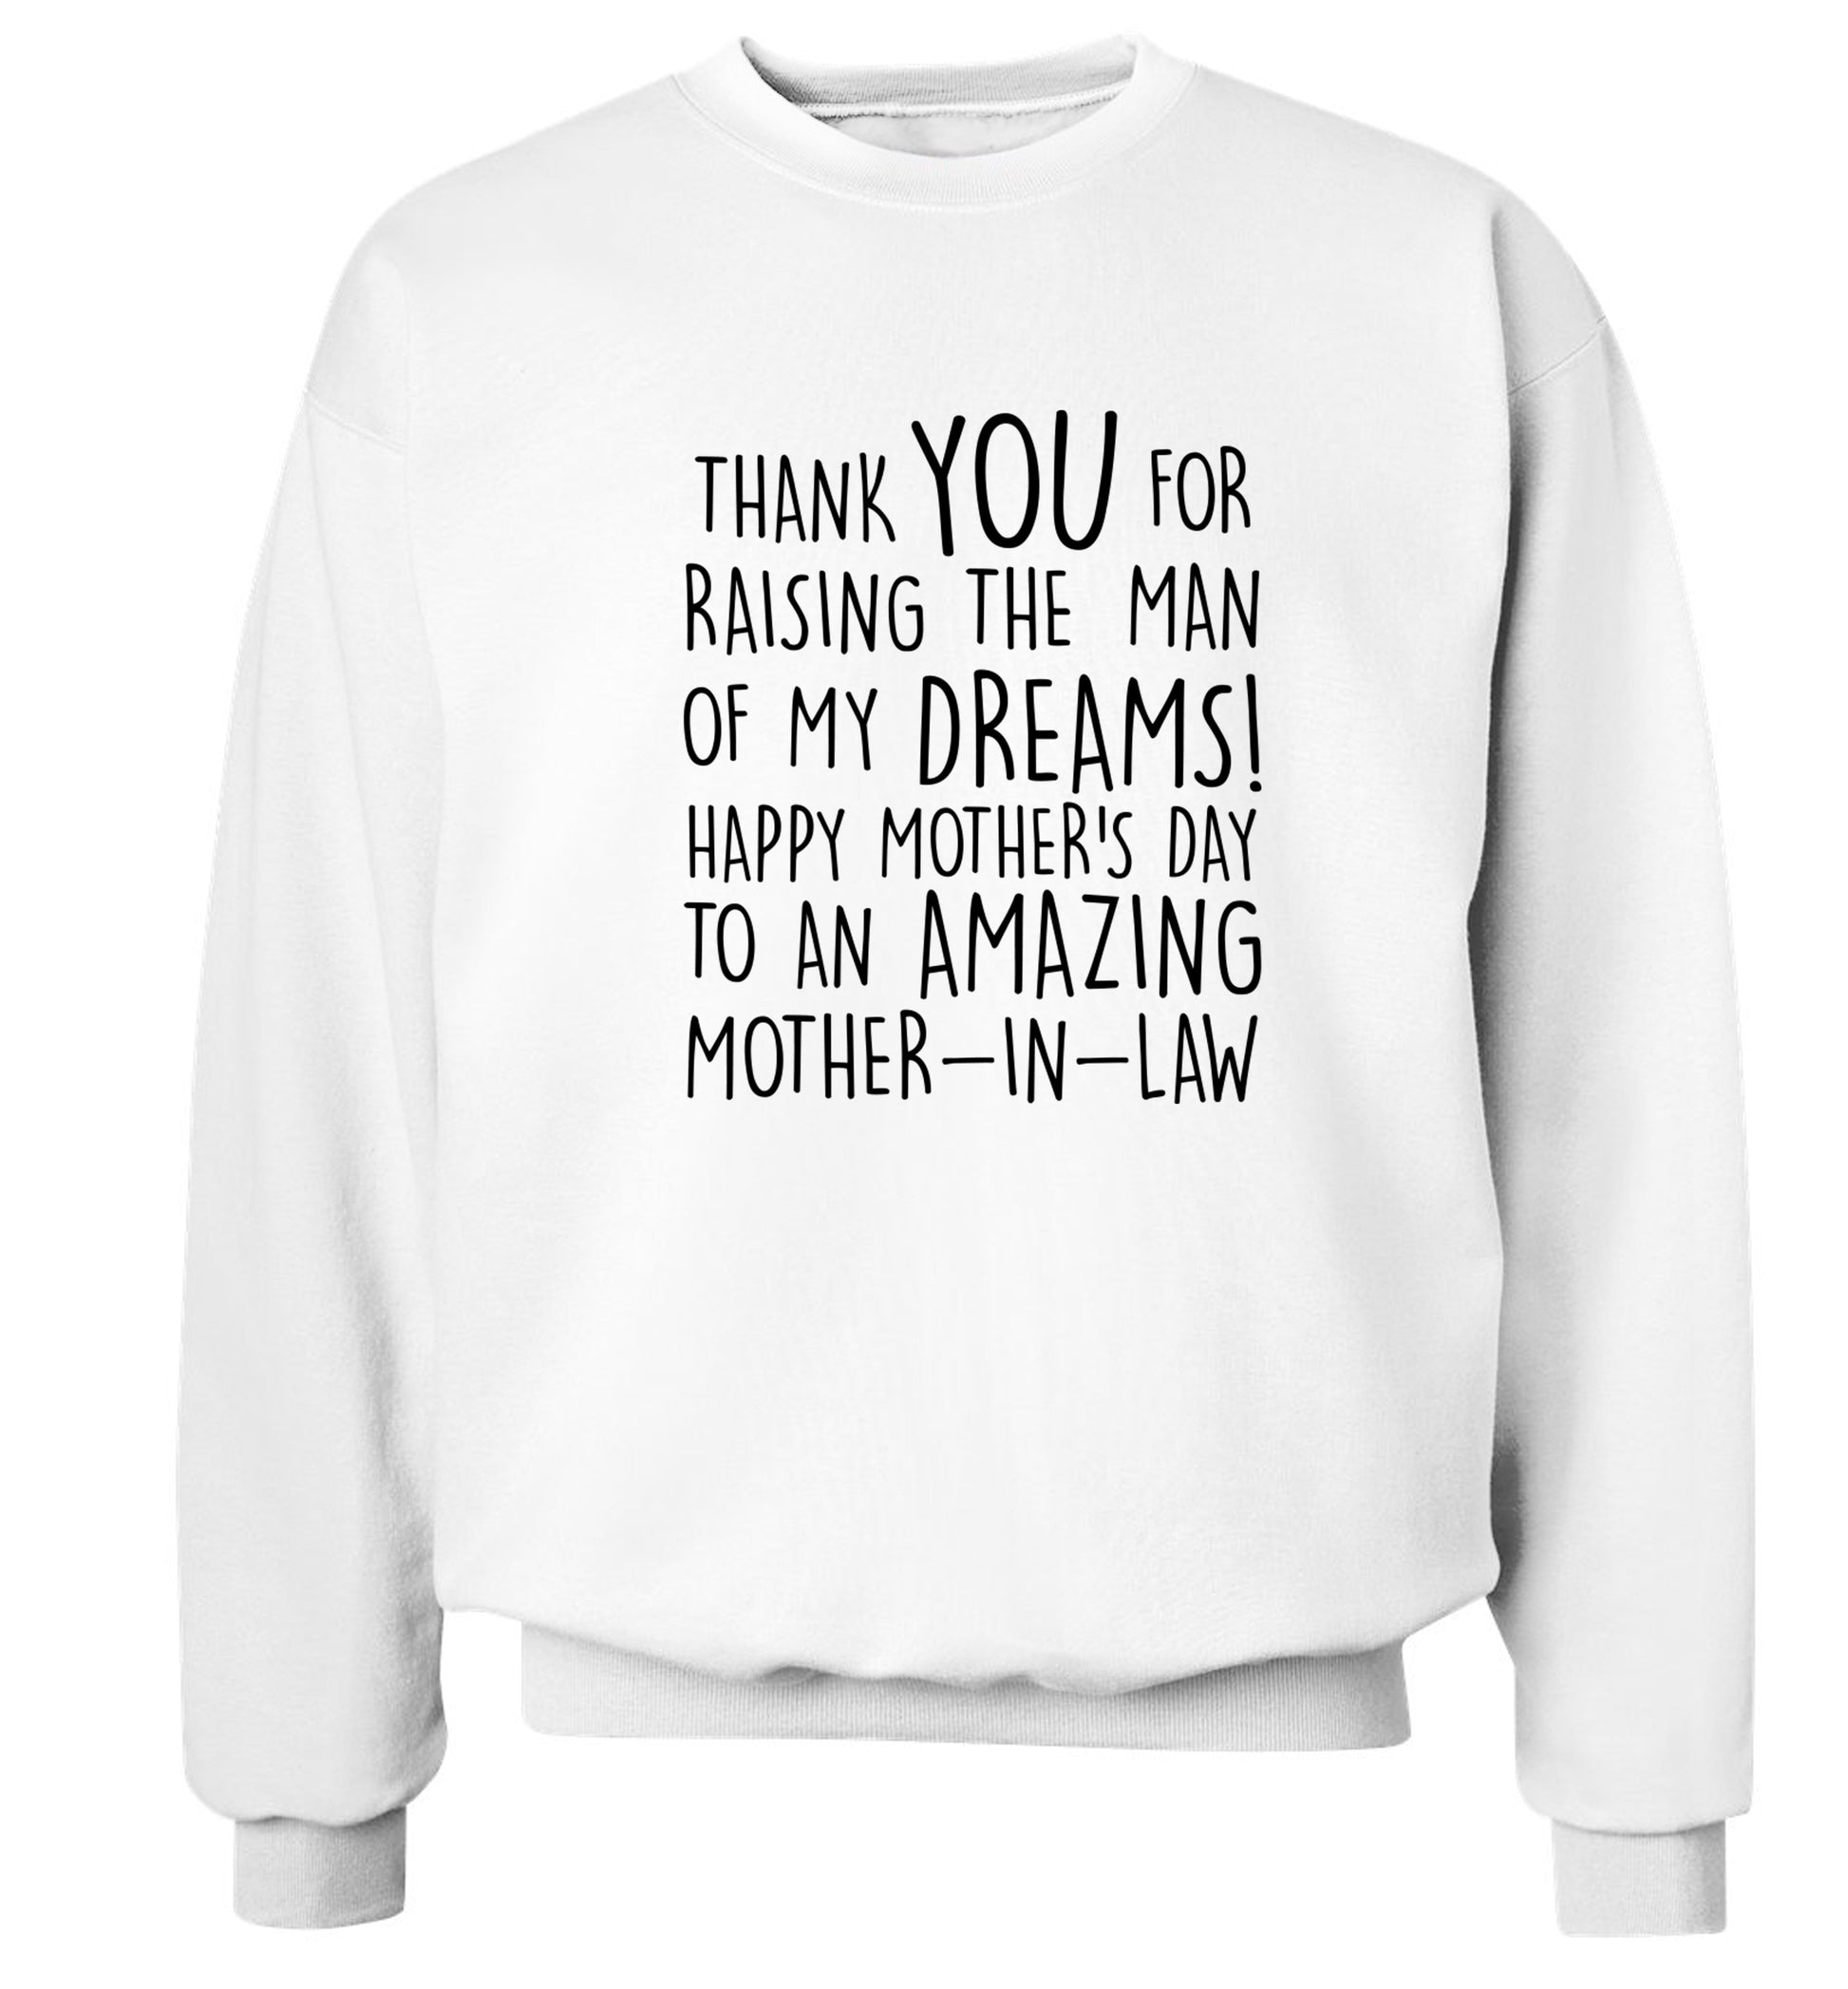 Thank you for raising the man of my dreams happy mother's day mother-in-law Adult's unisex white Sweater 2XL